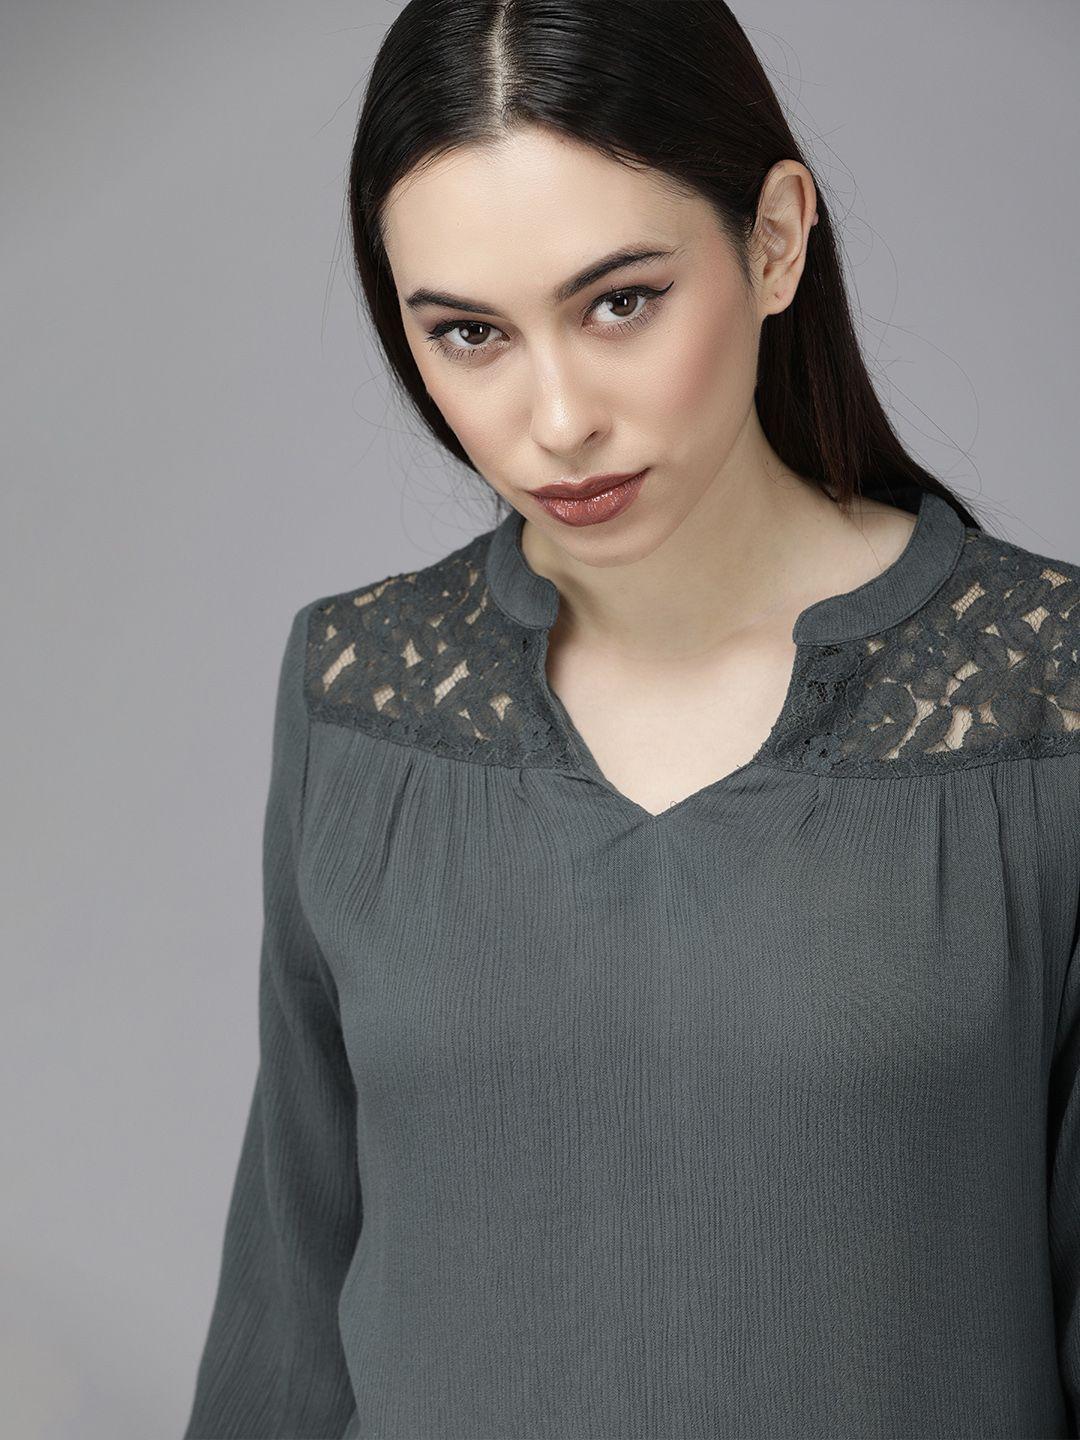 the roadster lifestyle co charcoal grey lace detailed regular top